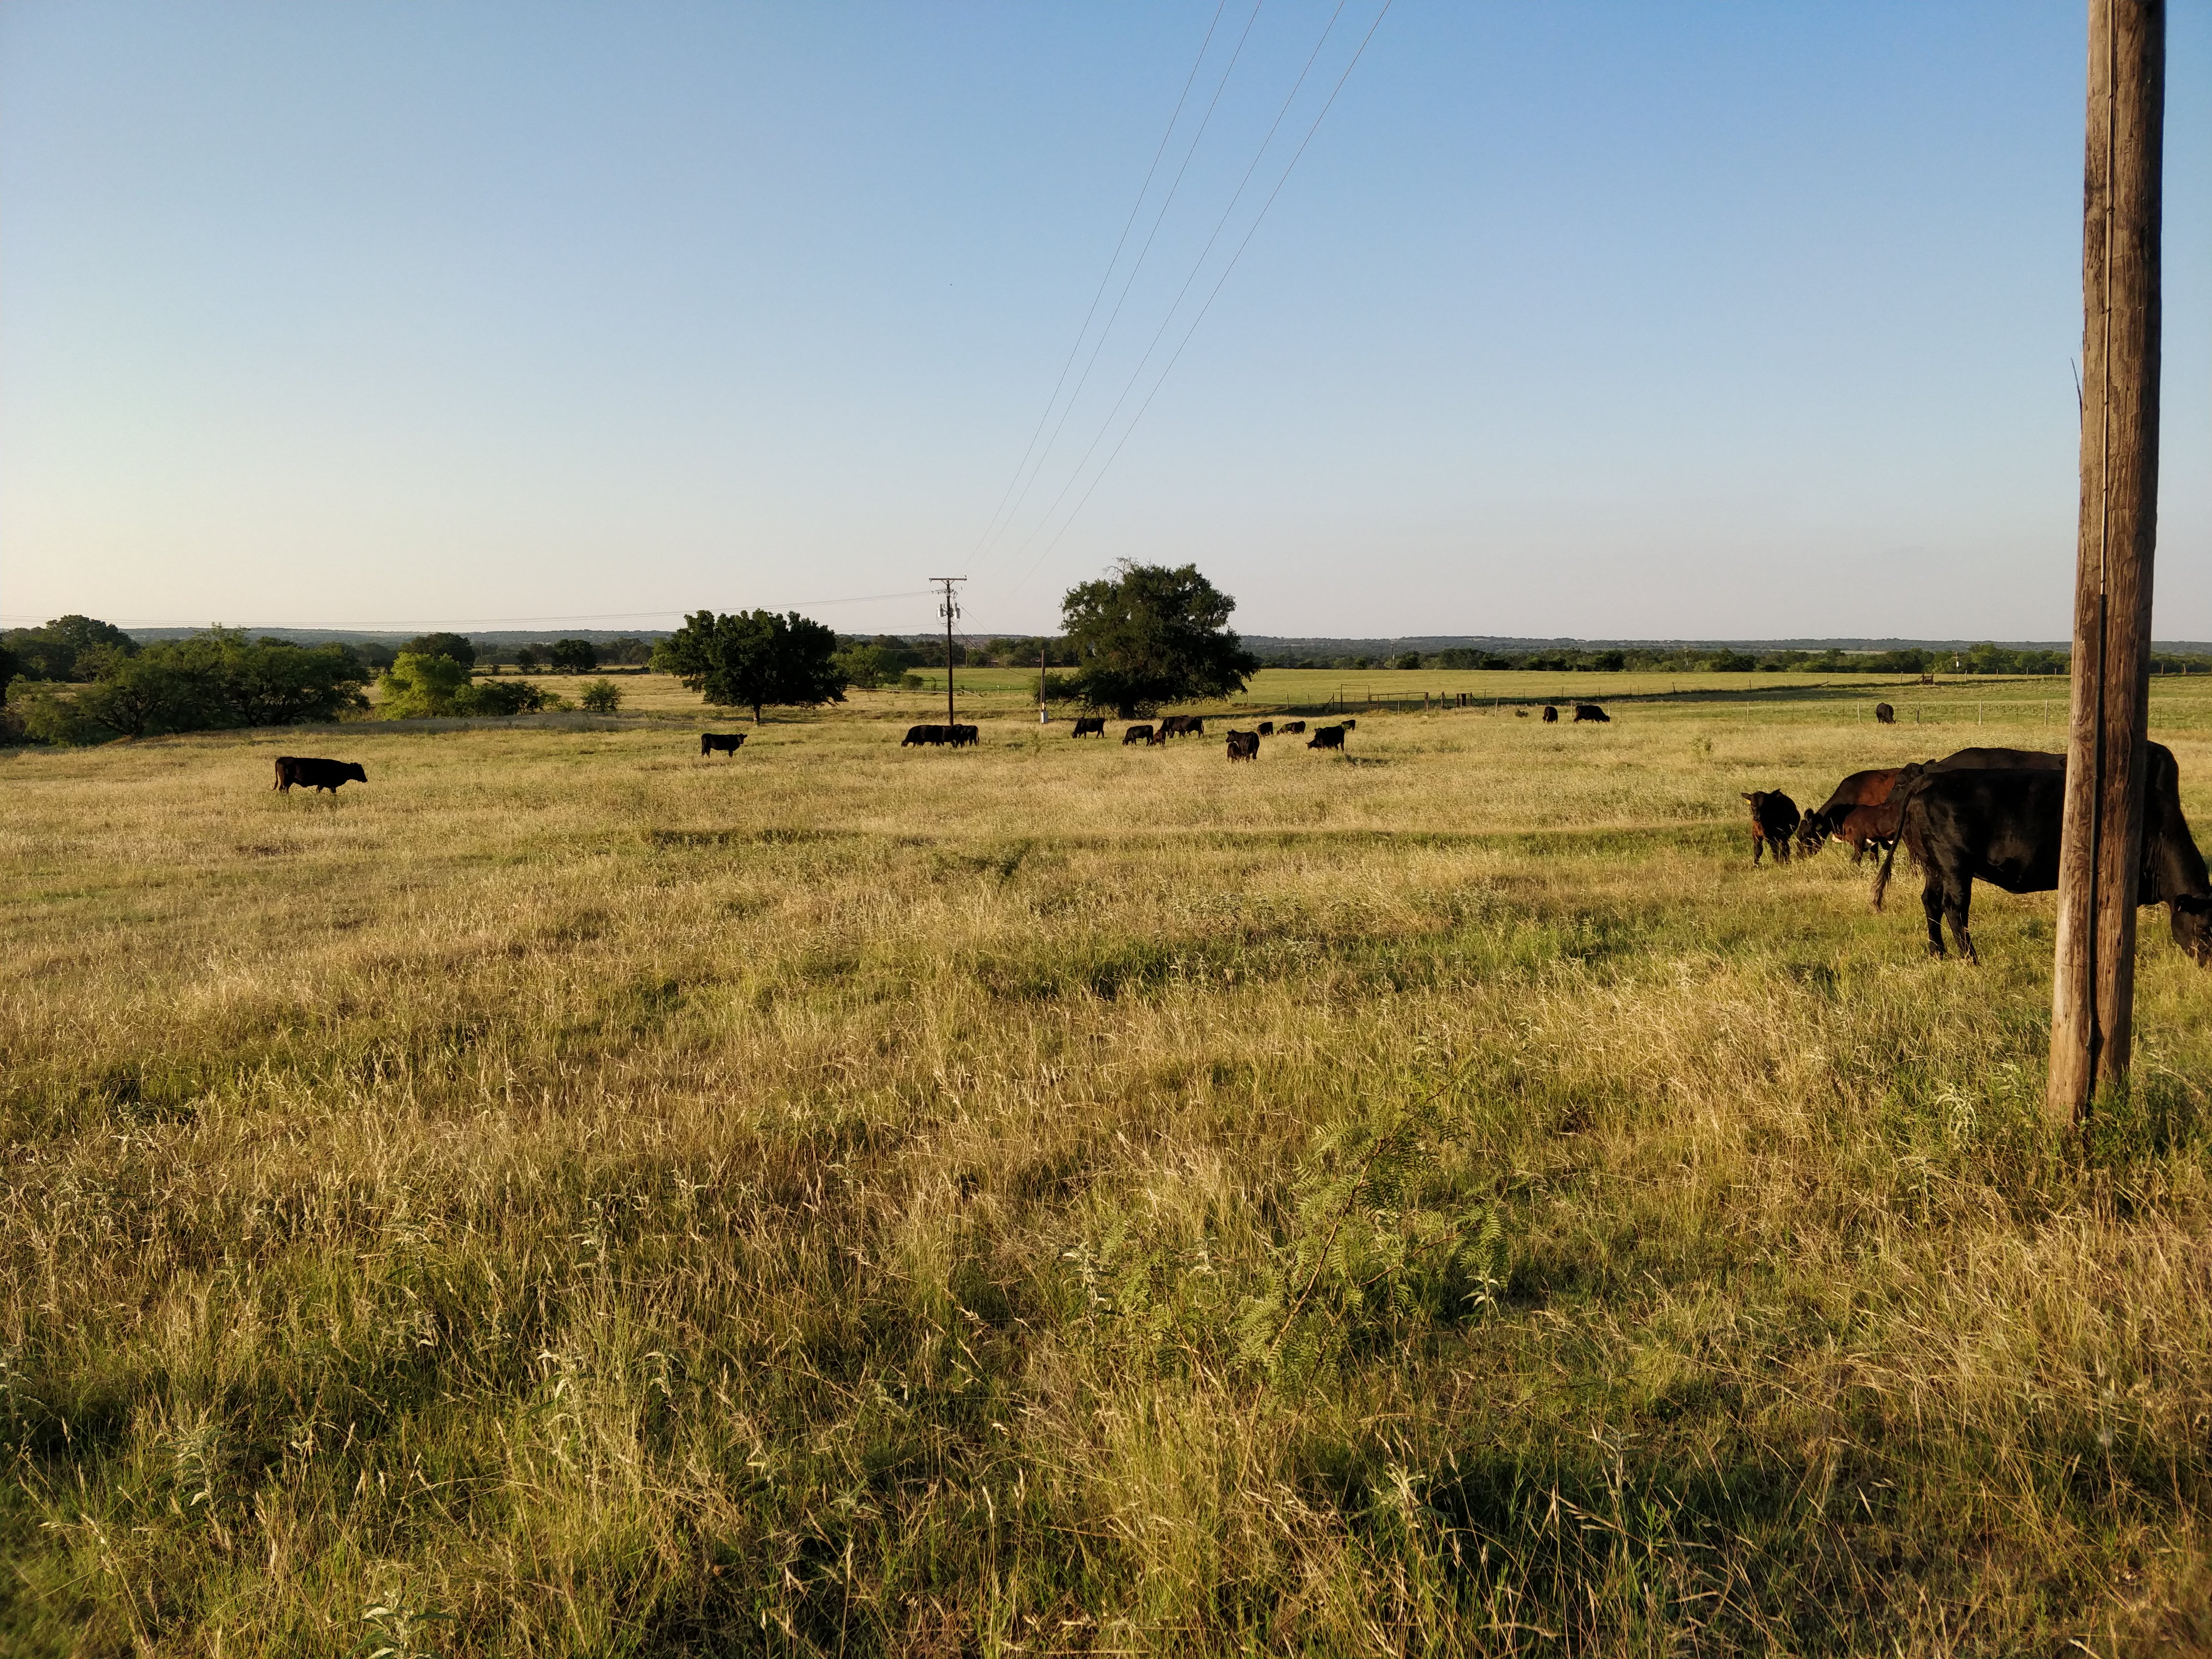 cattle on pasture, June 2020